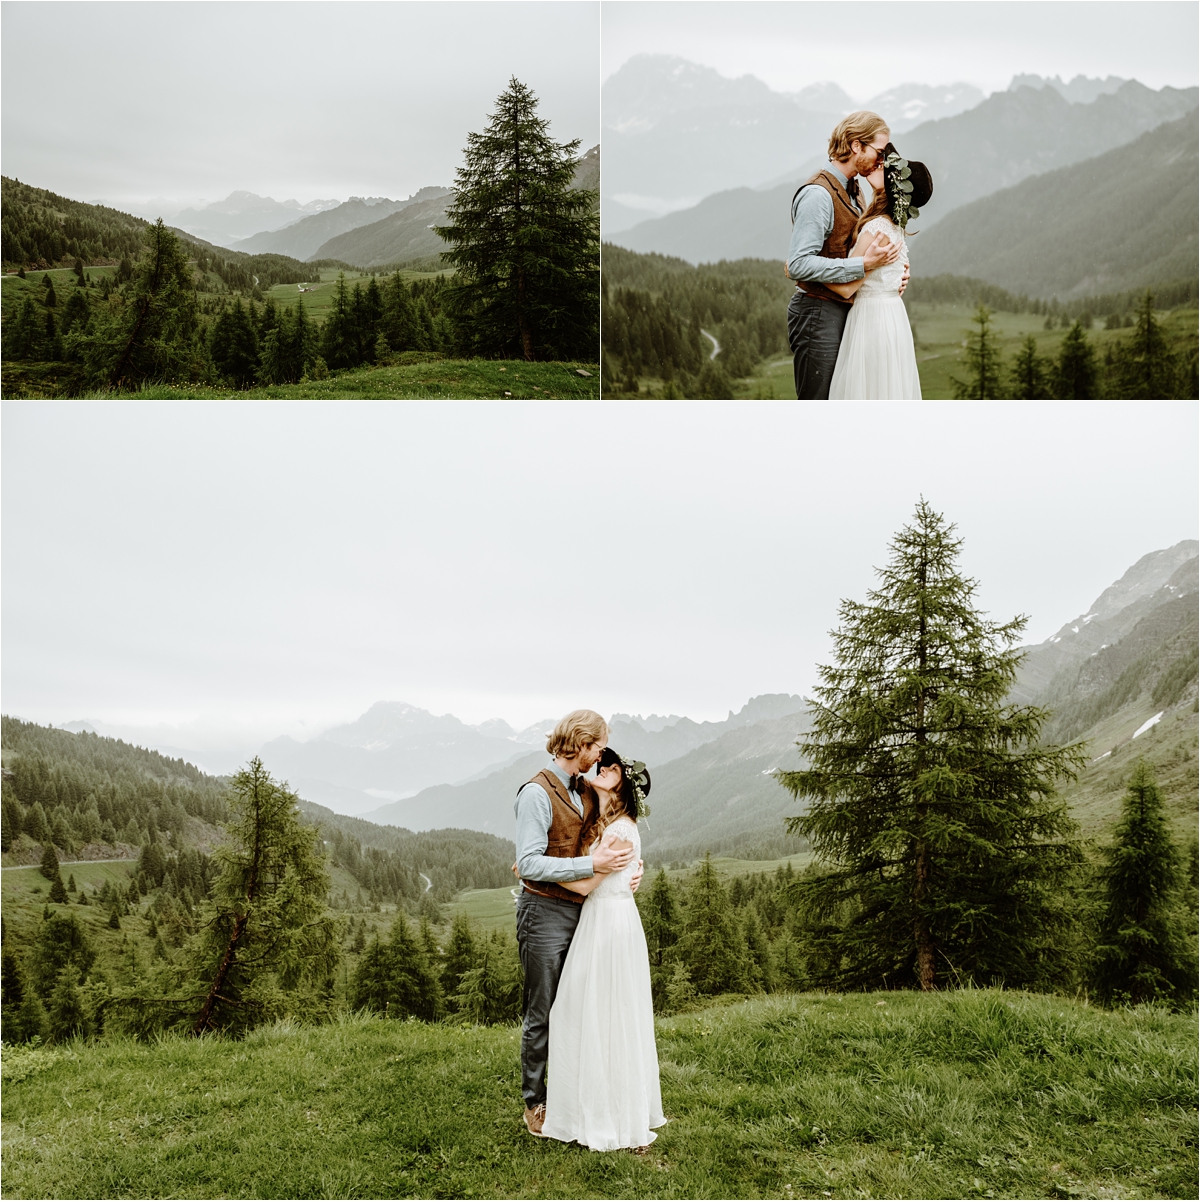 The bride and groom stand in a meadow in the rain with views of the Dolomites behind them. Photography by Wild Connections Photography